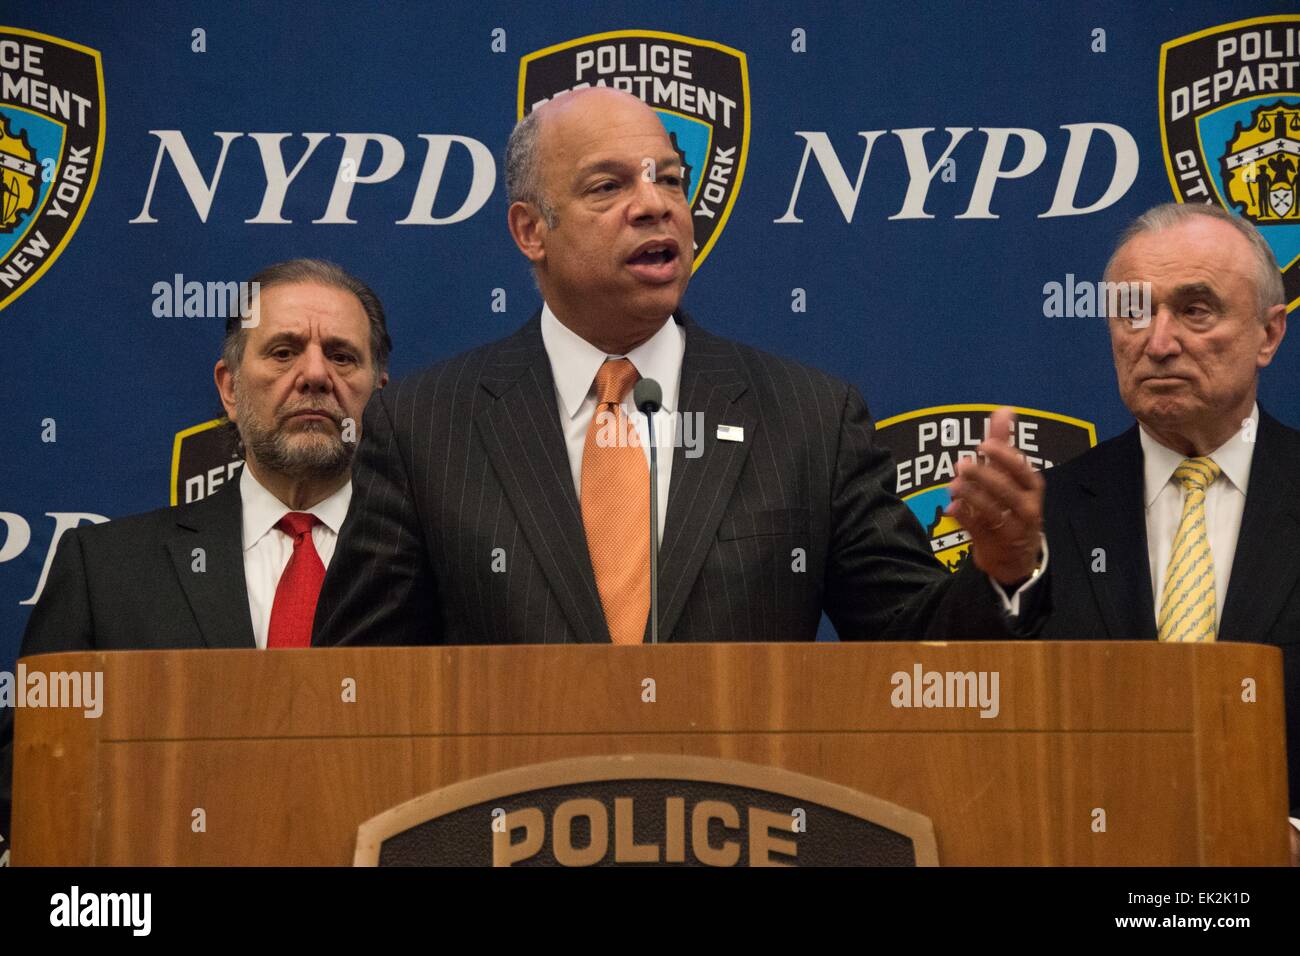 US Secretary of Homeland Security Jeh Johnson along with NY Police Commissioner William Bratton and other leaders holds a press conference to announce nine preparedness grant programs totaling more than $1.6 billion April 2, 2015 in New York City, NY. Stock Photo